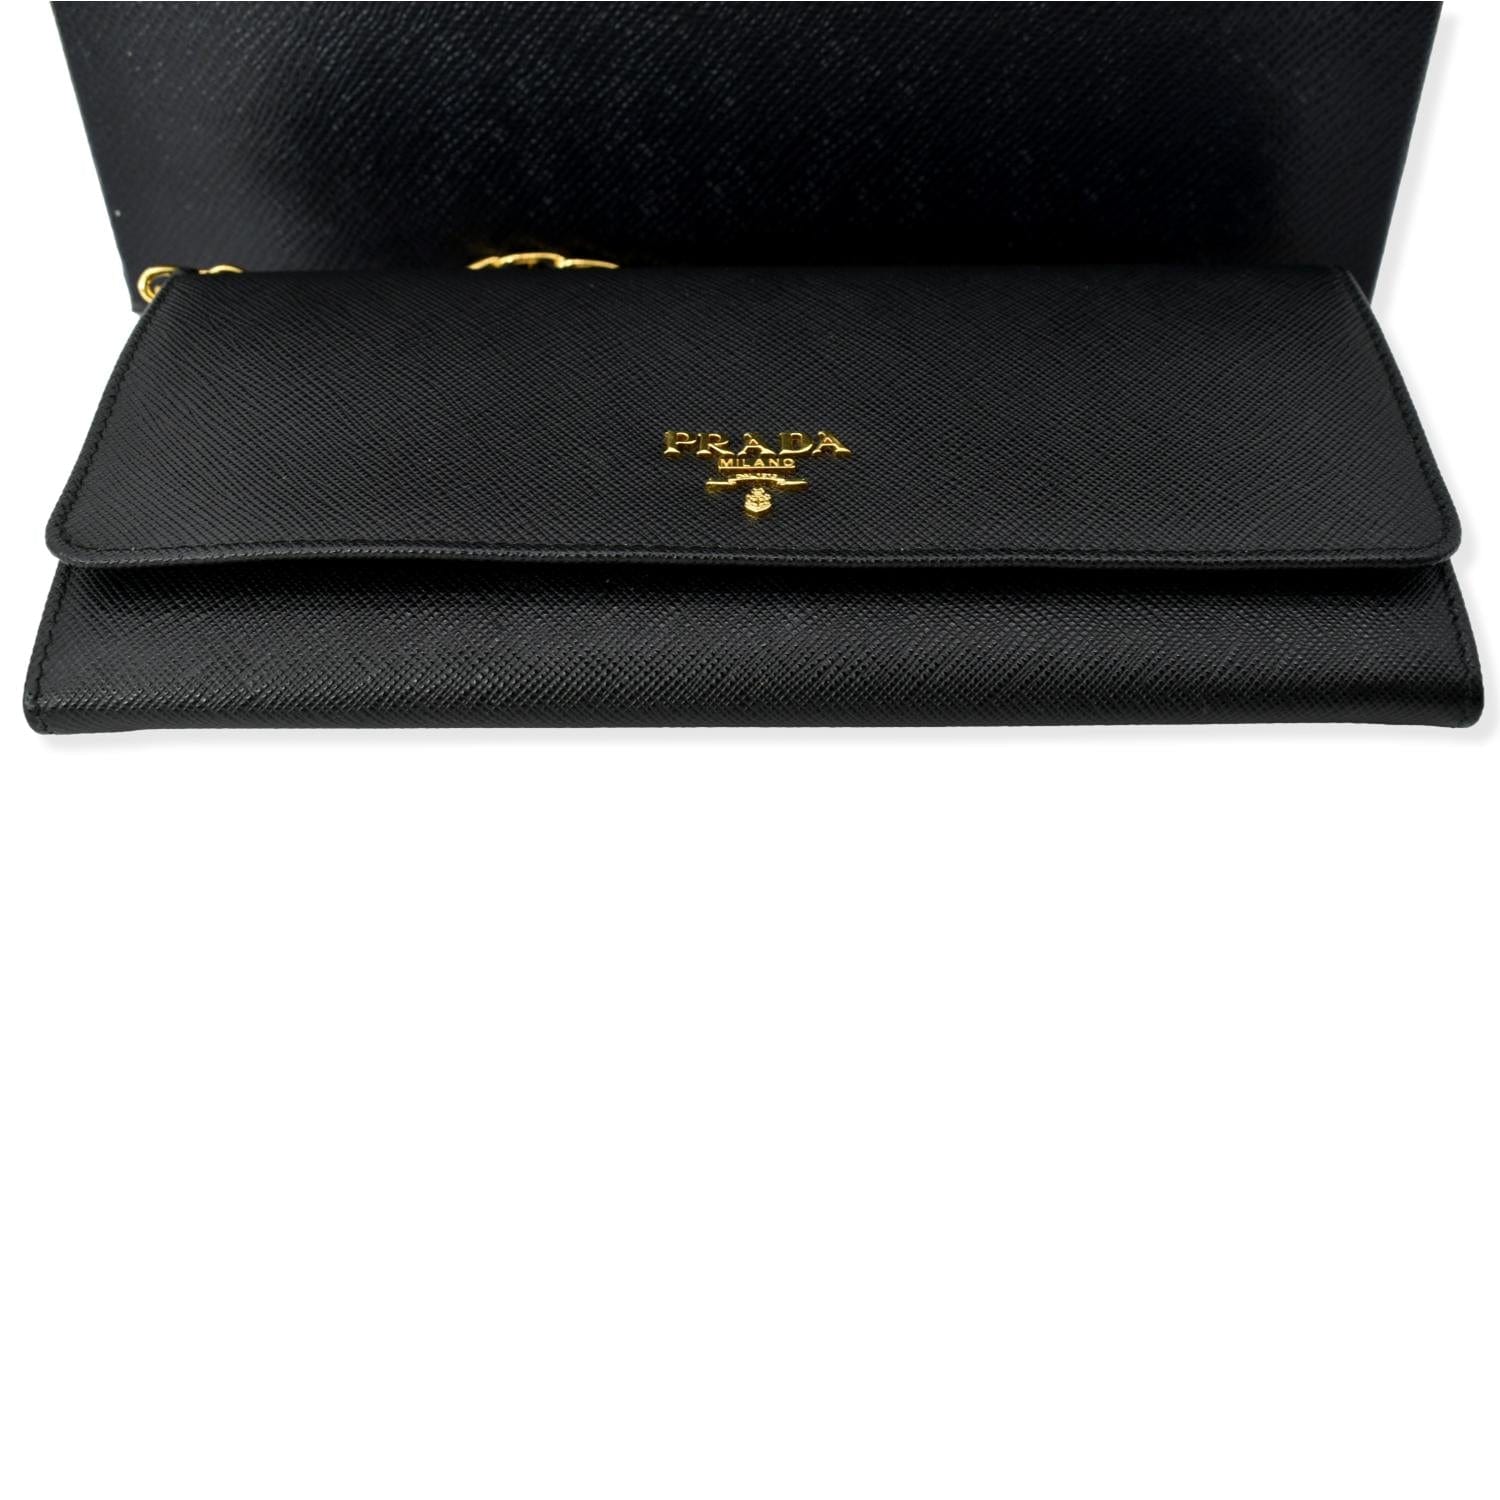 Discover Elegance: Prada Wallet On Chain at Dress Raleigh's Luxury